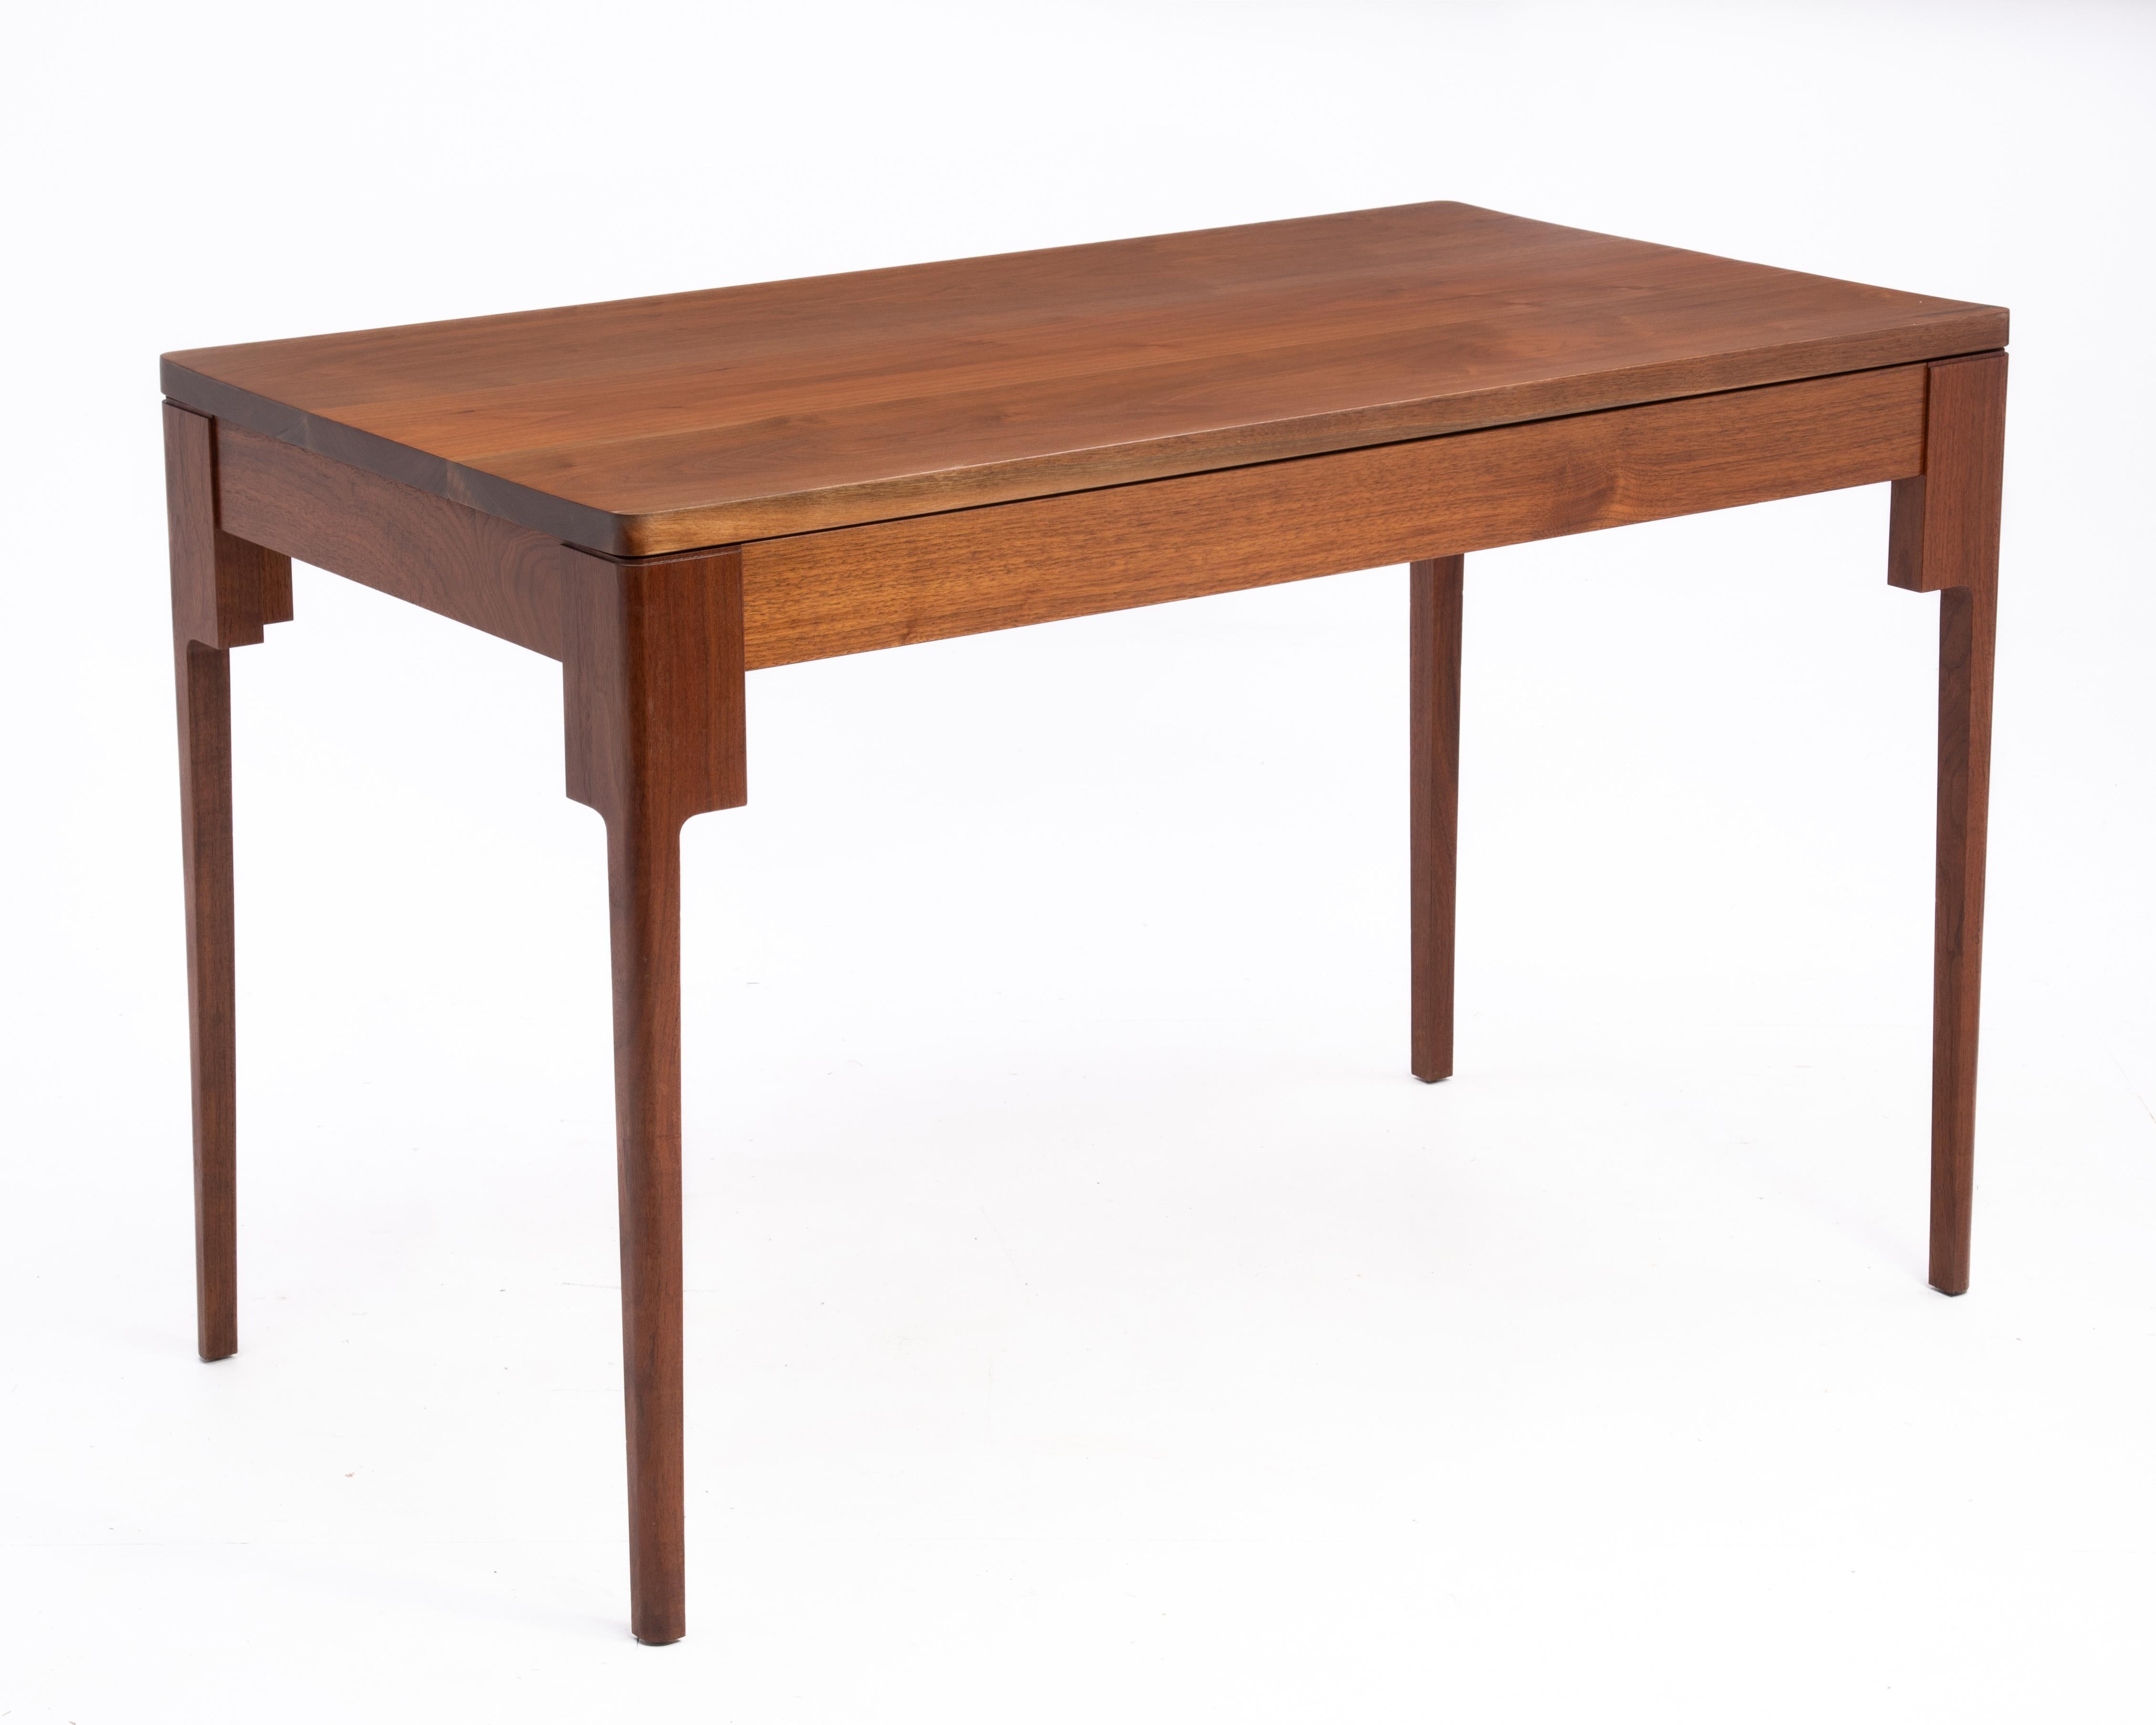 American Bespoke Solid Walnut Desk Dining Table Floating Top Tapered Legs New Hope School For Sale